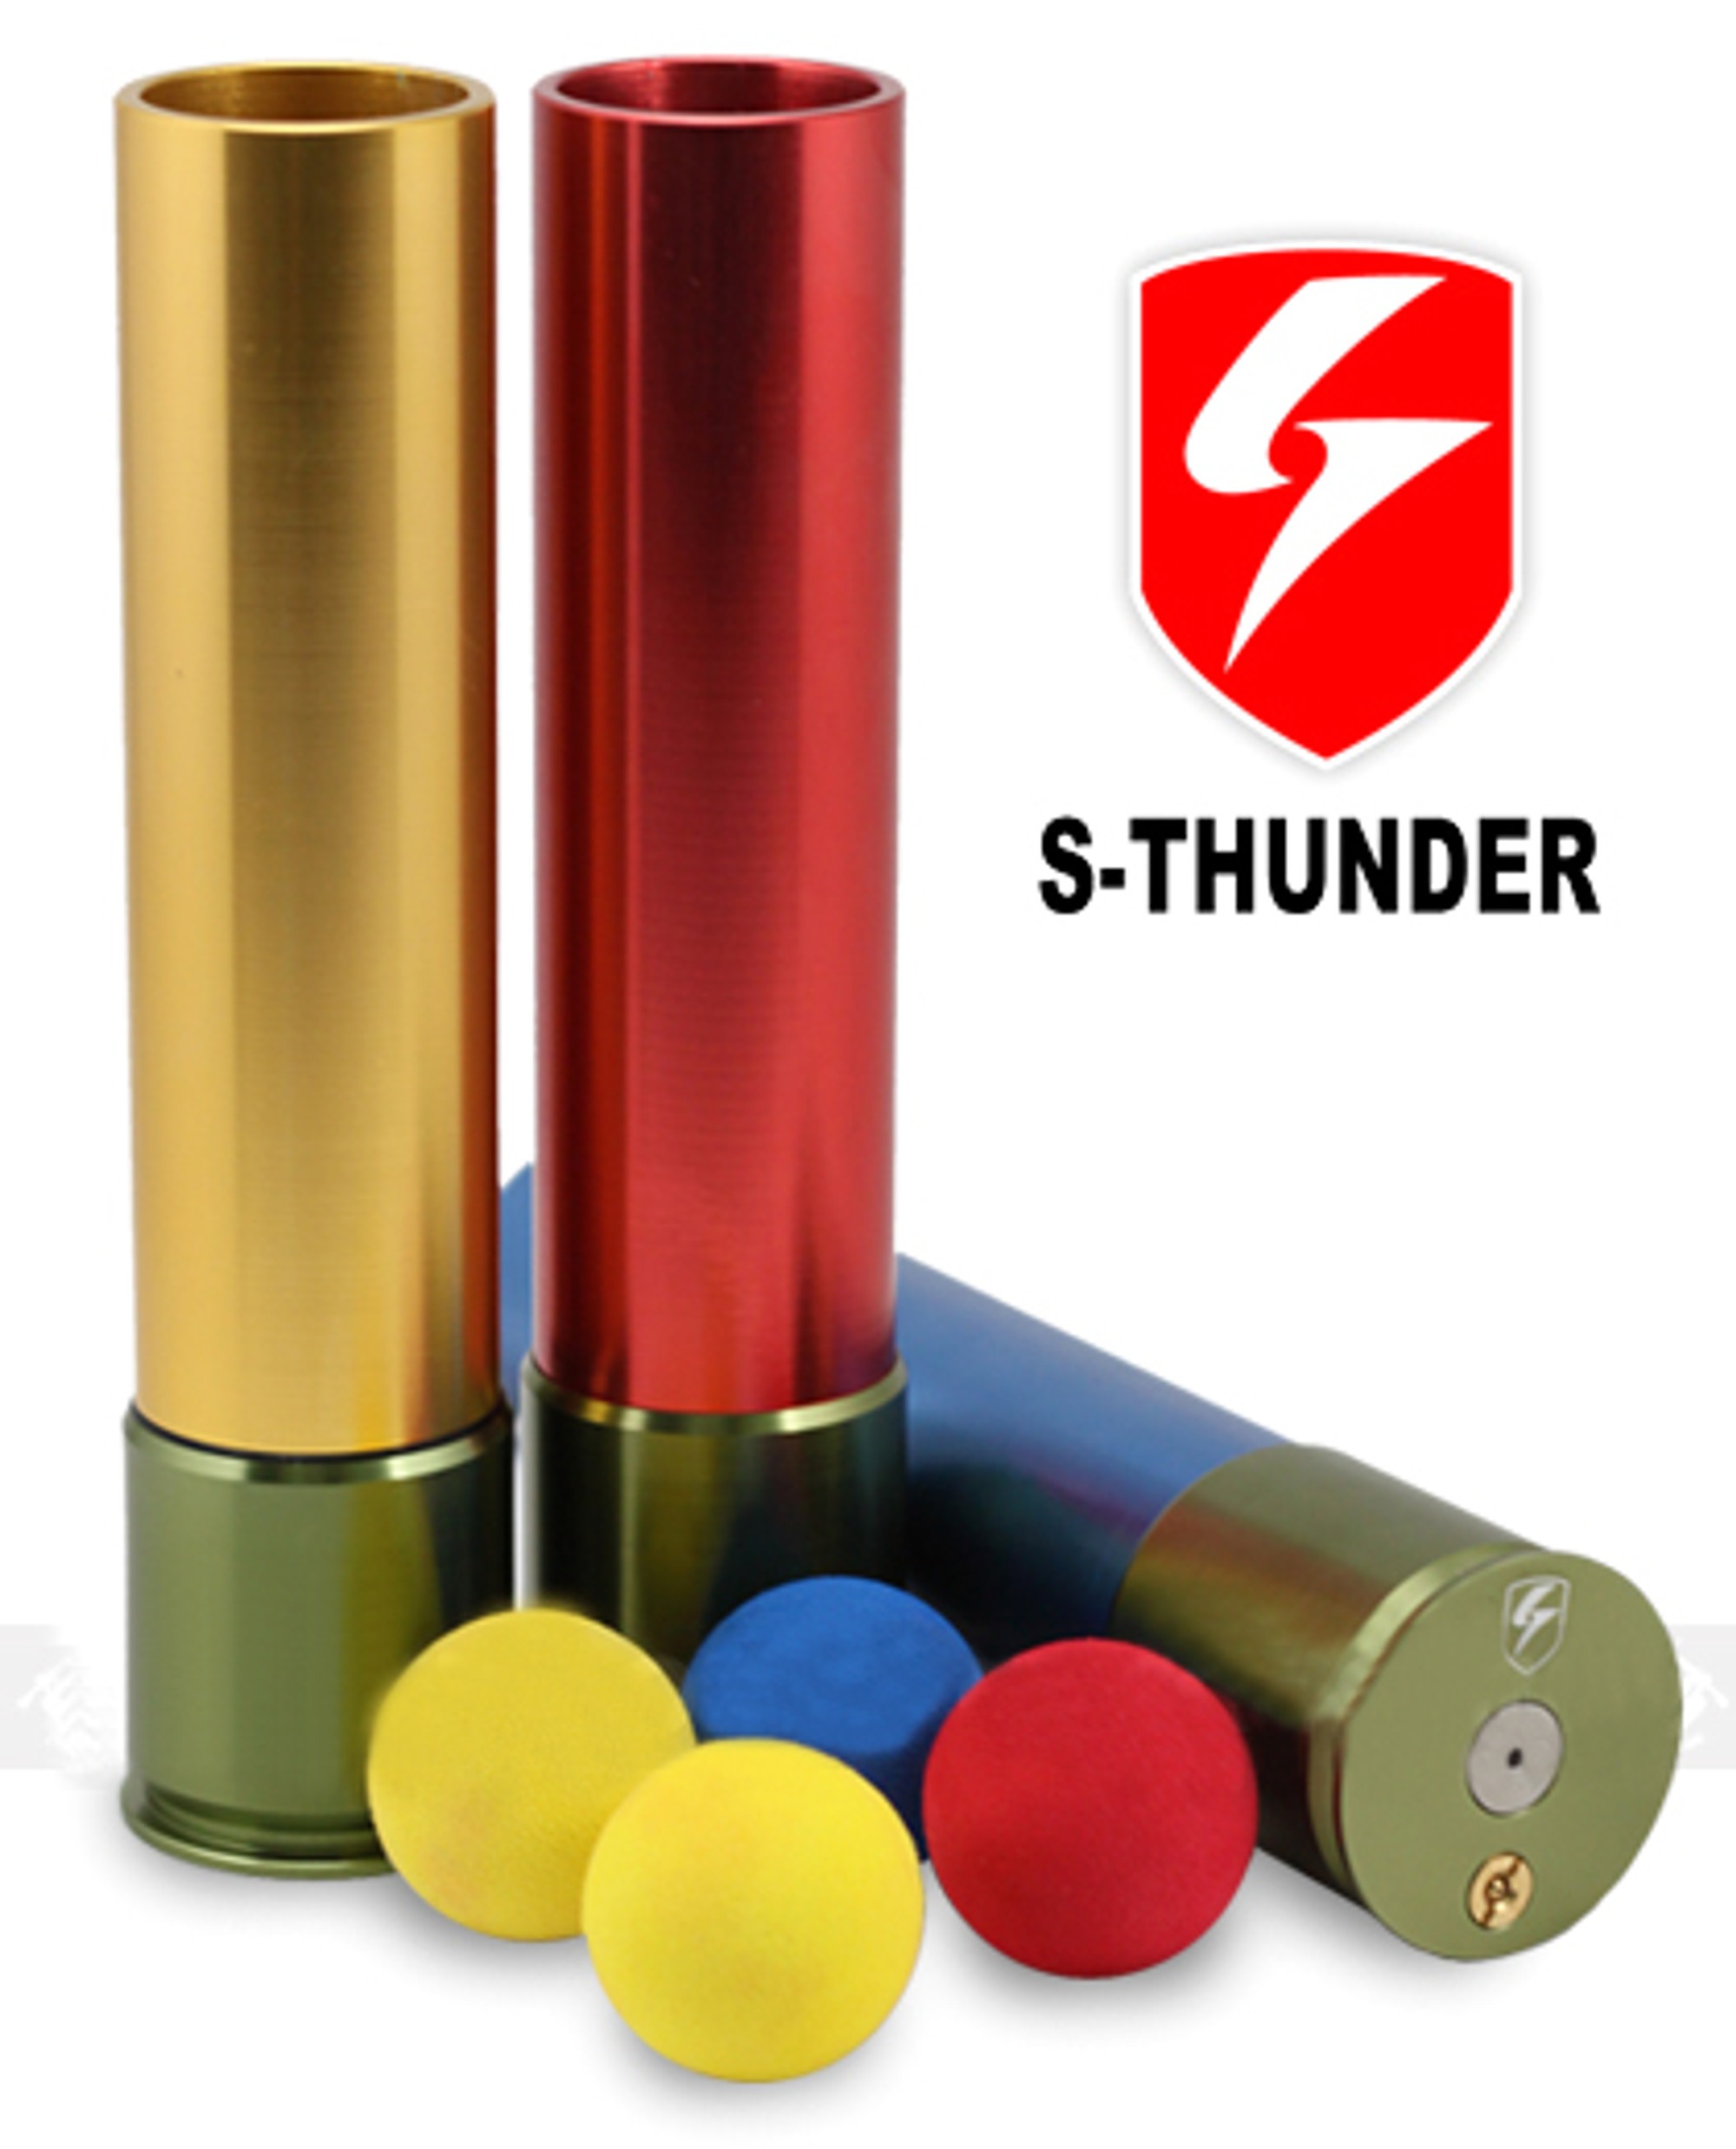 S-Thunder "Loudest" Foam Ball 40mm Airsoft Gas Grenade - Long Type (One)